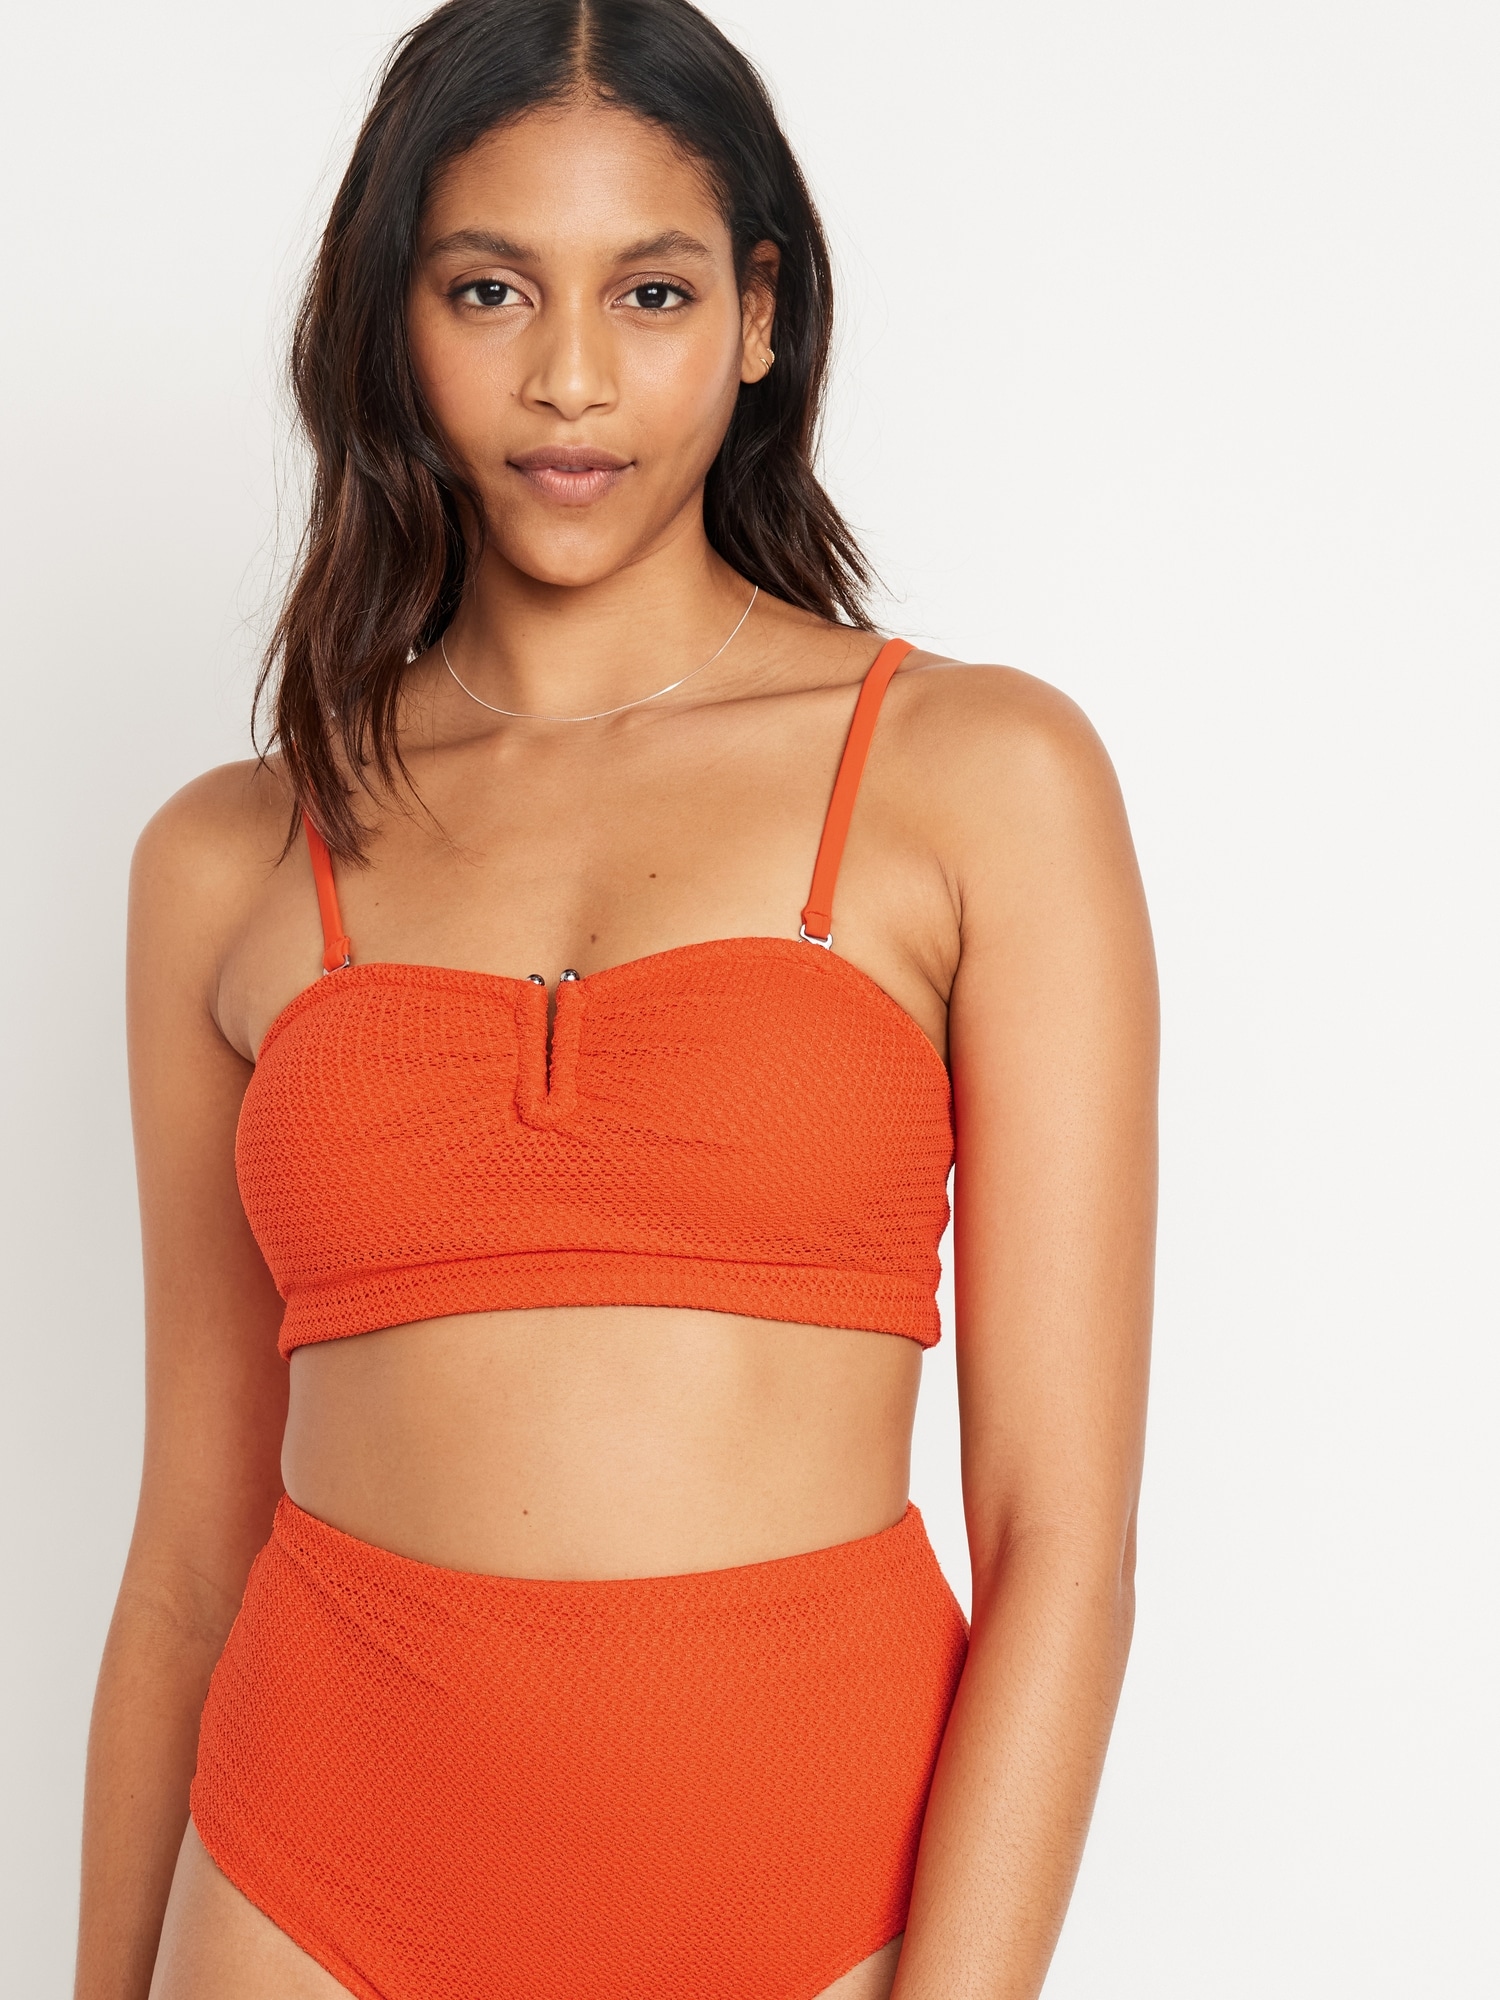 Supportive Bandeau Tops